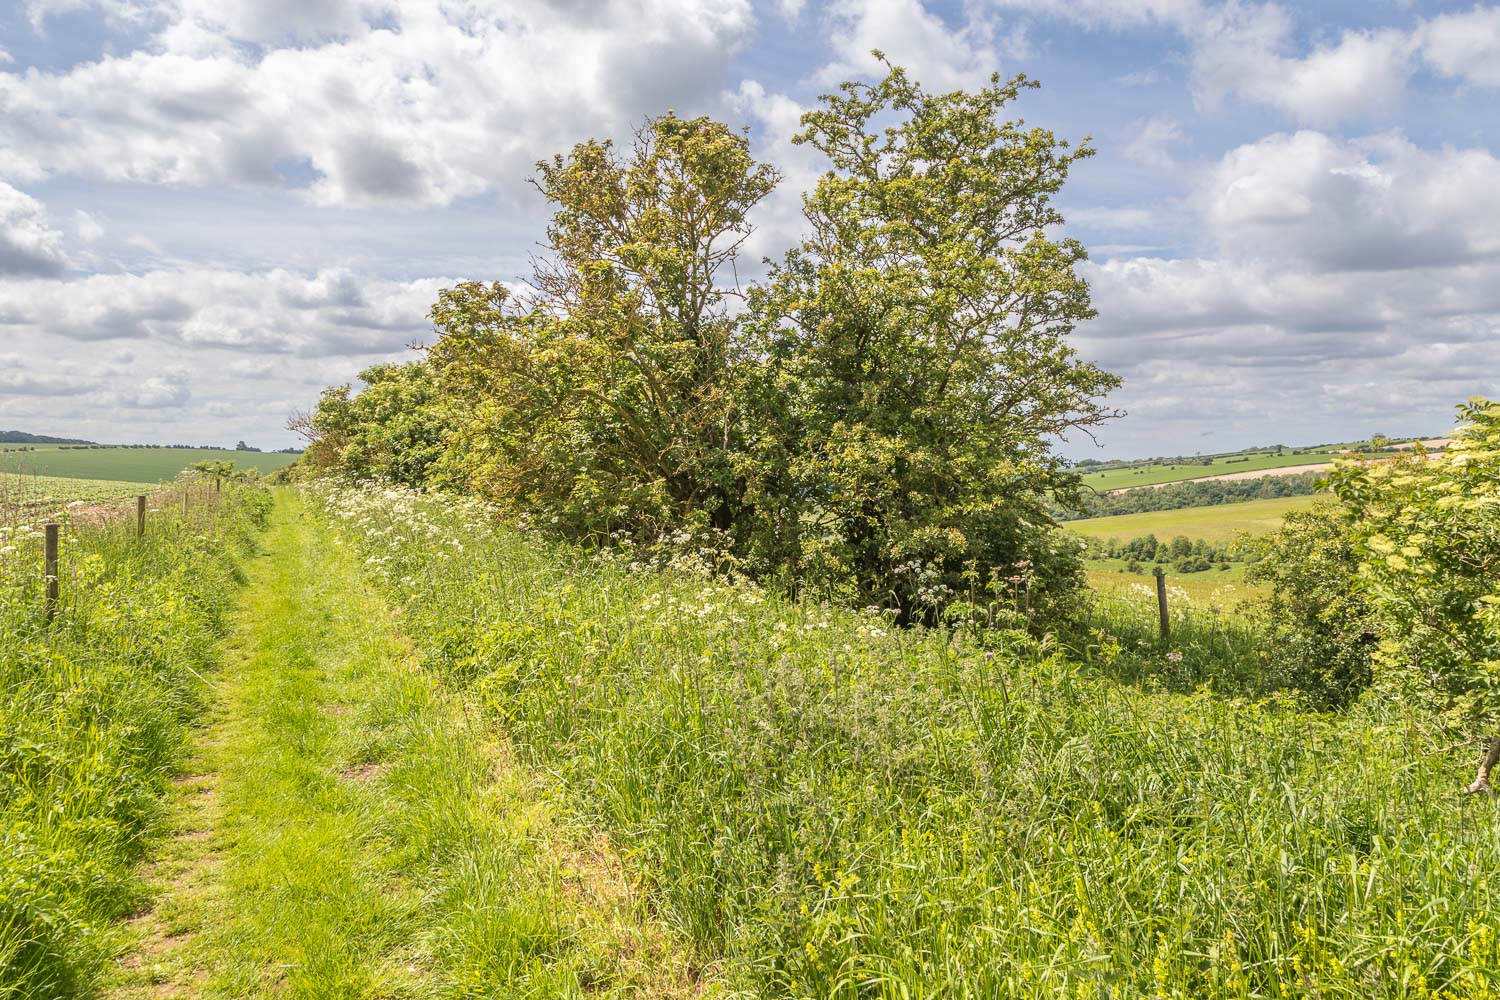 Yorkshire Wolds Way, Chalkland Way, Minster Way